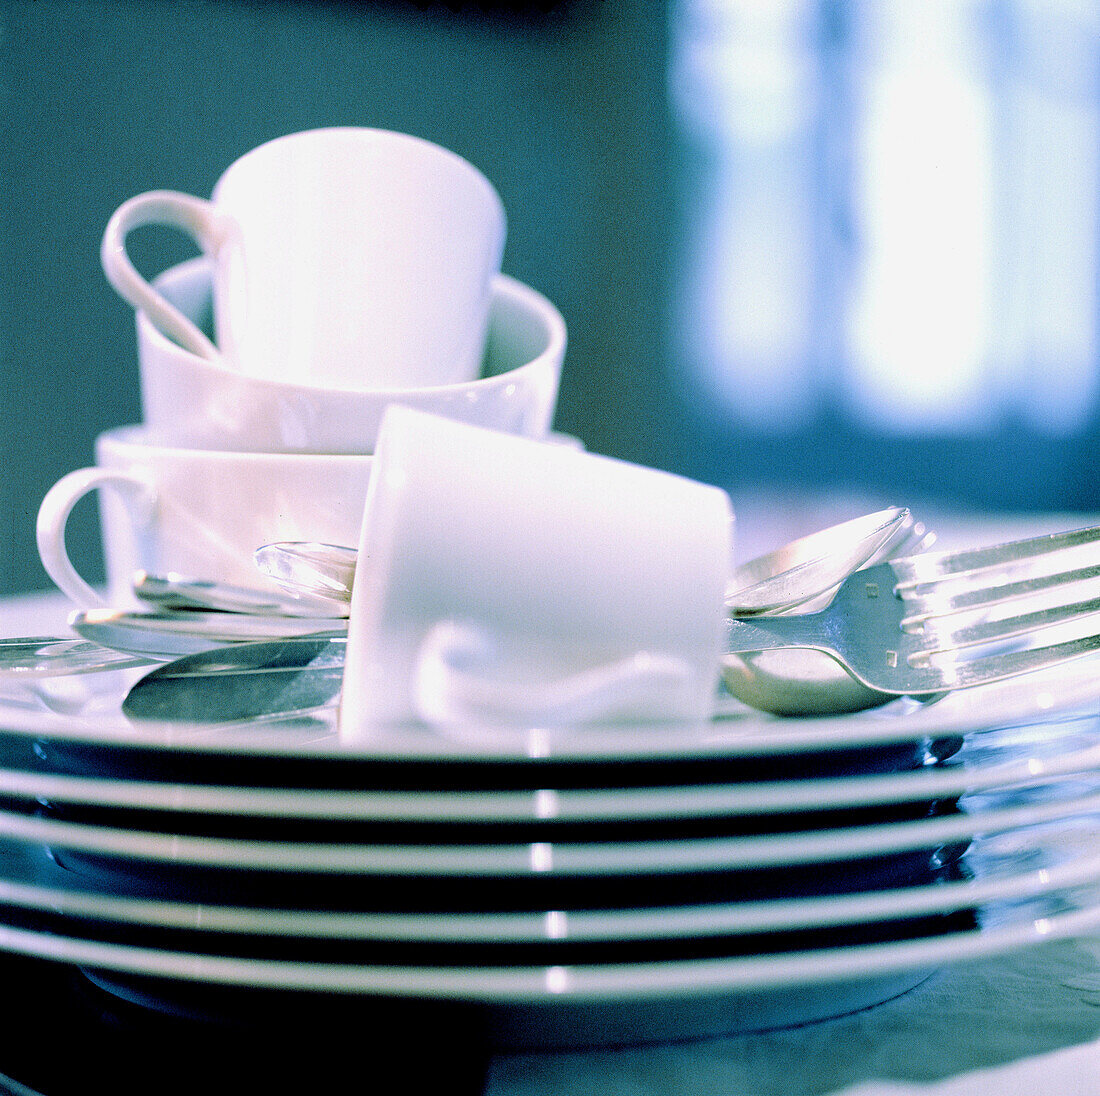  Clean, Close up, Close-up, Closeup, Color, Colour, Concept, Concepts, Cup, Cups, Cutlery, Dish, Dishes, Fork, Forks, Heap, Heaped, Heaps, Indoor, Indoors, Inside, Interior, Object, Objects, Pile, Piled up, Piles, Plate, Plates, Ready, Square, Stack, Stac